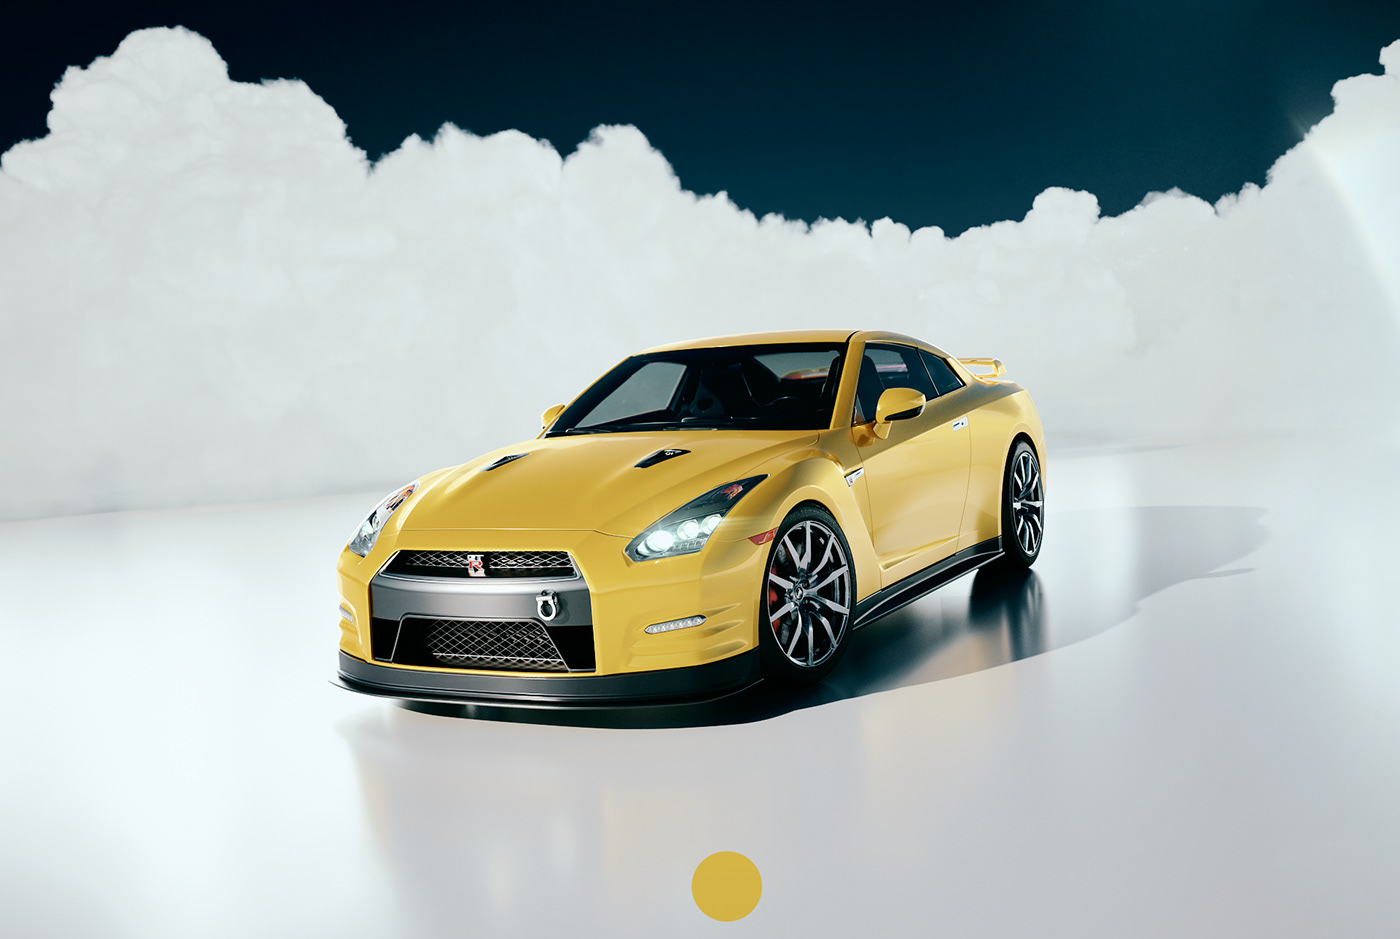 Nissan GT-r Automotive Photography cgi and retouching Cloudscapes Form Over Narrative Taste Of Victory yellow and white resplendent impulse Mission Control